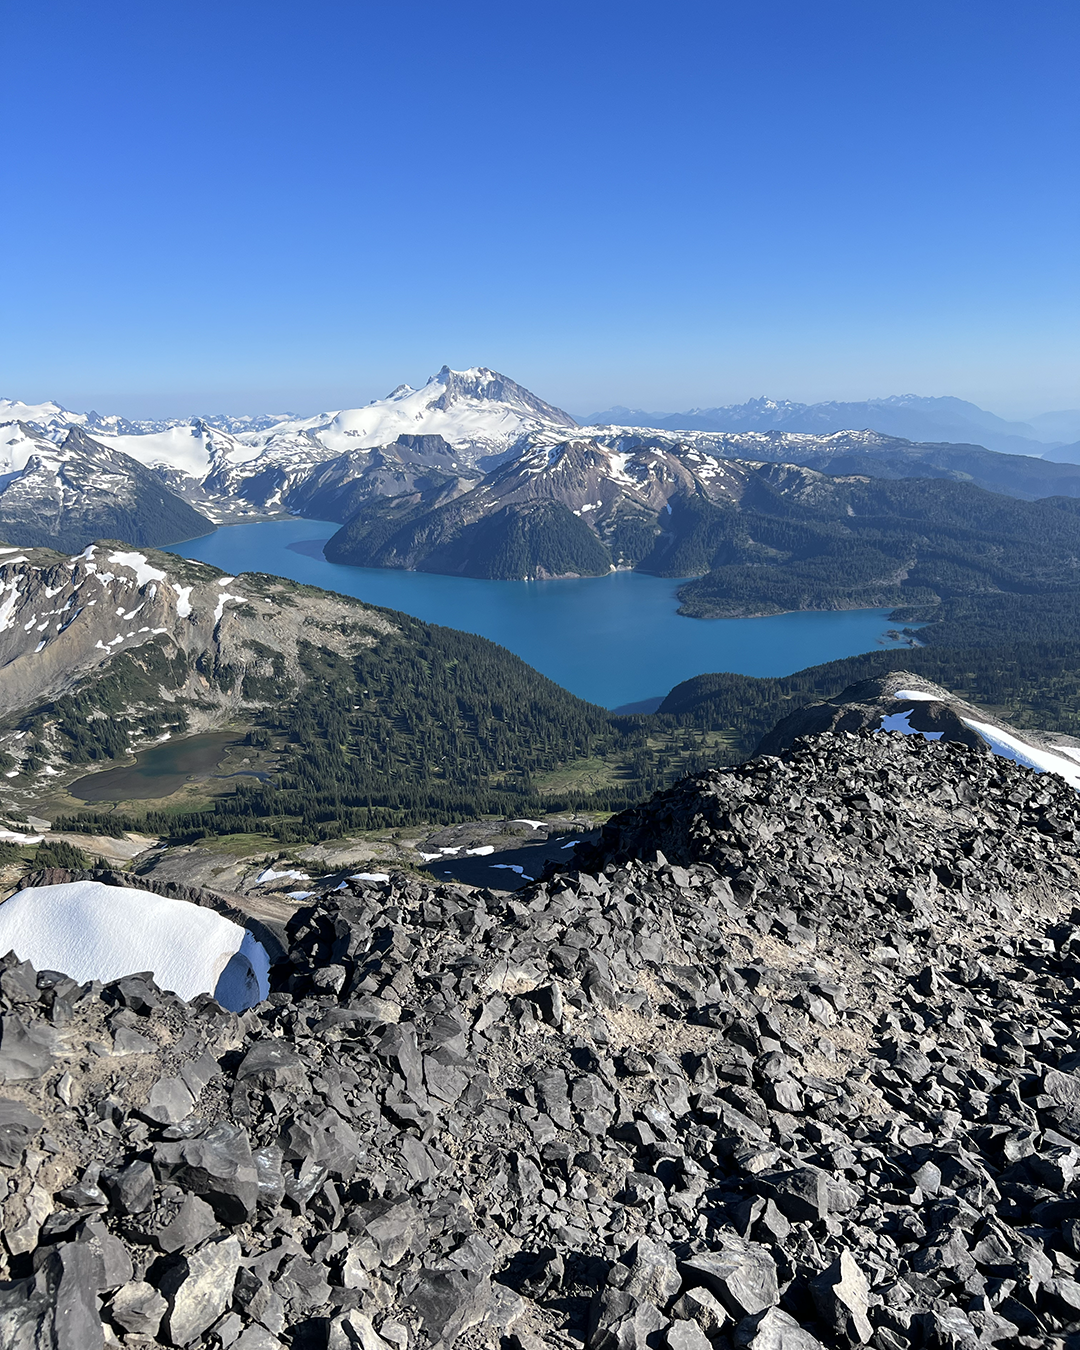  Looking out over Garibaldi Lake from Black Tusk. 